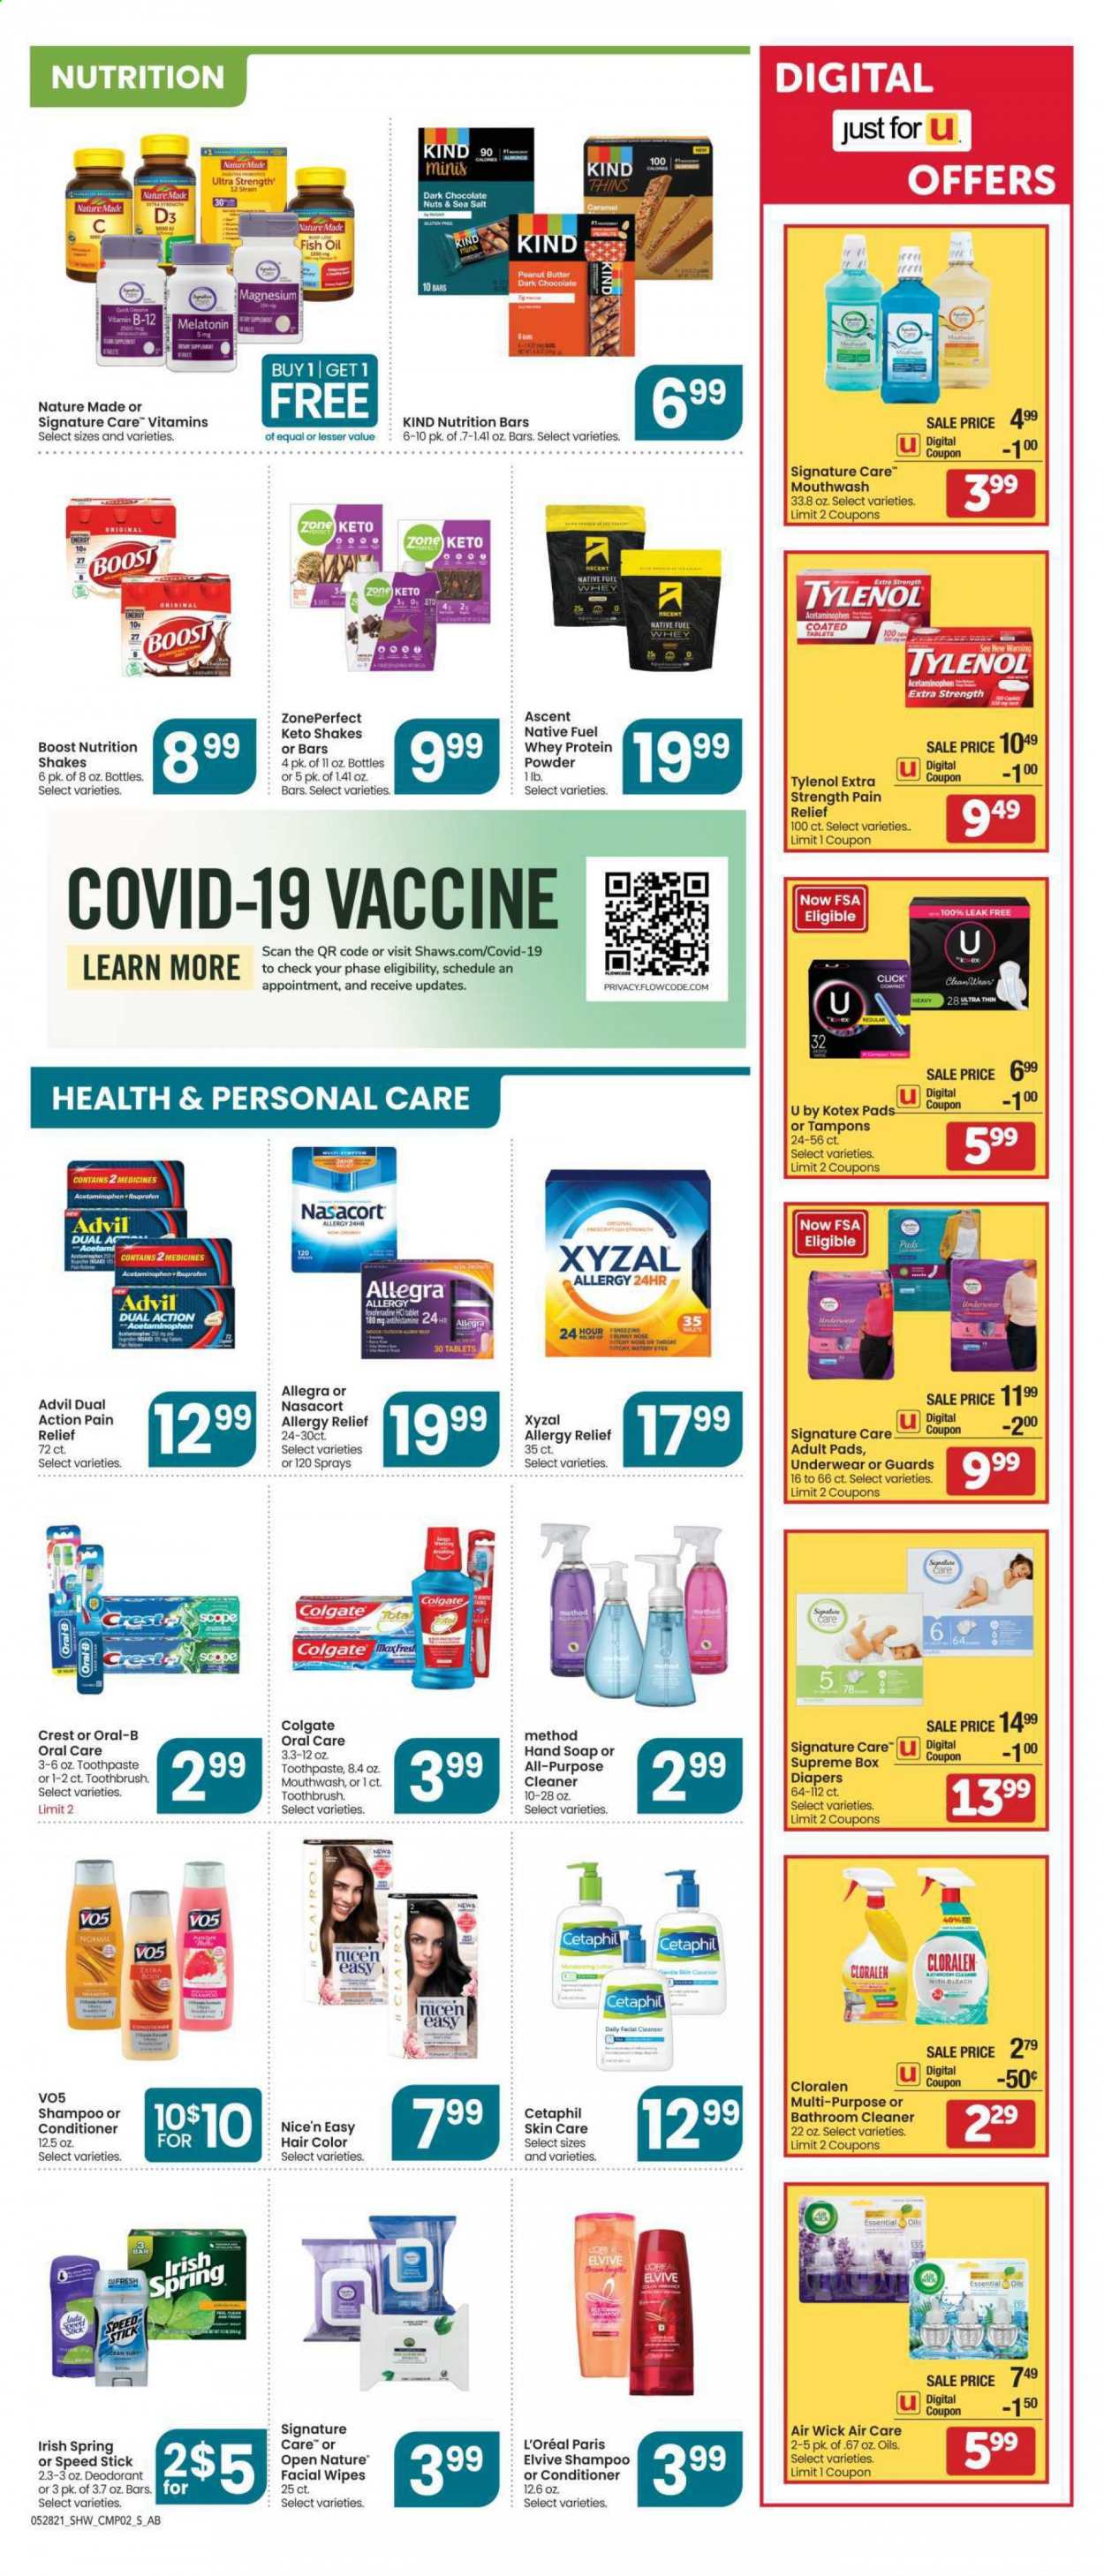 thumbnail - Shaw’s Flyer - 05/28/2021 - 06/03/2021 - Sales products - shake, chocolate, dark chocolate, Thins, nutrition bar, caramel, peanut butter, Boost, L'Or, wipes, cleaner, bleach, Surf, shampoo, hand soap, soap, Colgate, toothbrush, Oral-B, toothpaste, mouthwash, Crest, Kotex, Kotex pads, tampons, L’Oréal, conditioner, hair color, VO5, anti-perspirant, Speed Stick, deodorant, pan, Air Wick, fish oil, magnesium, Melatonin, Nature Made, Tylenol, Ibuprofen, pain relief, Advil Rapid, whey protein, vitamin D3, allergy relief. Page 6.